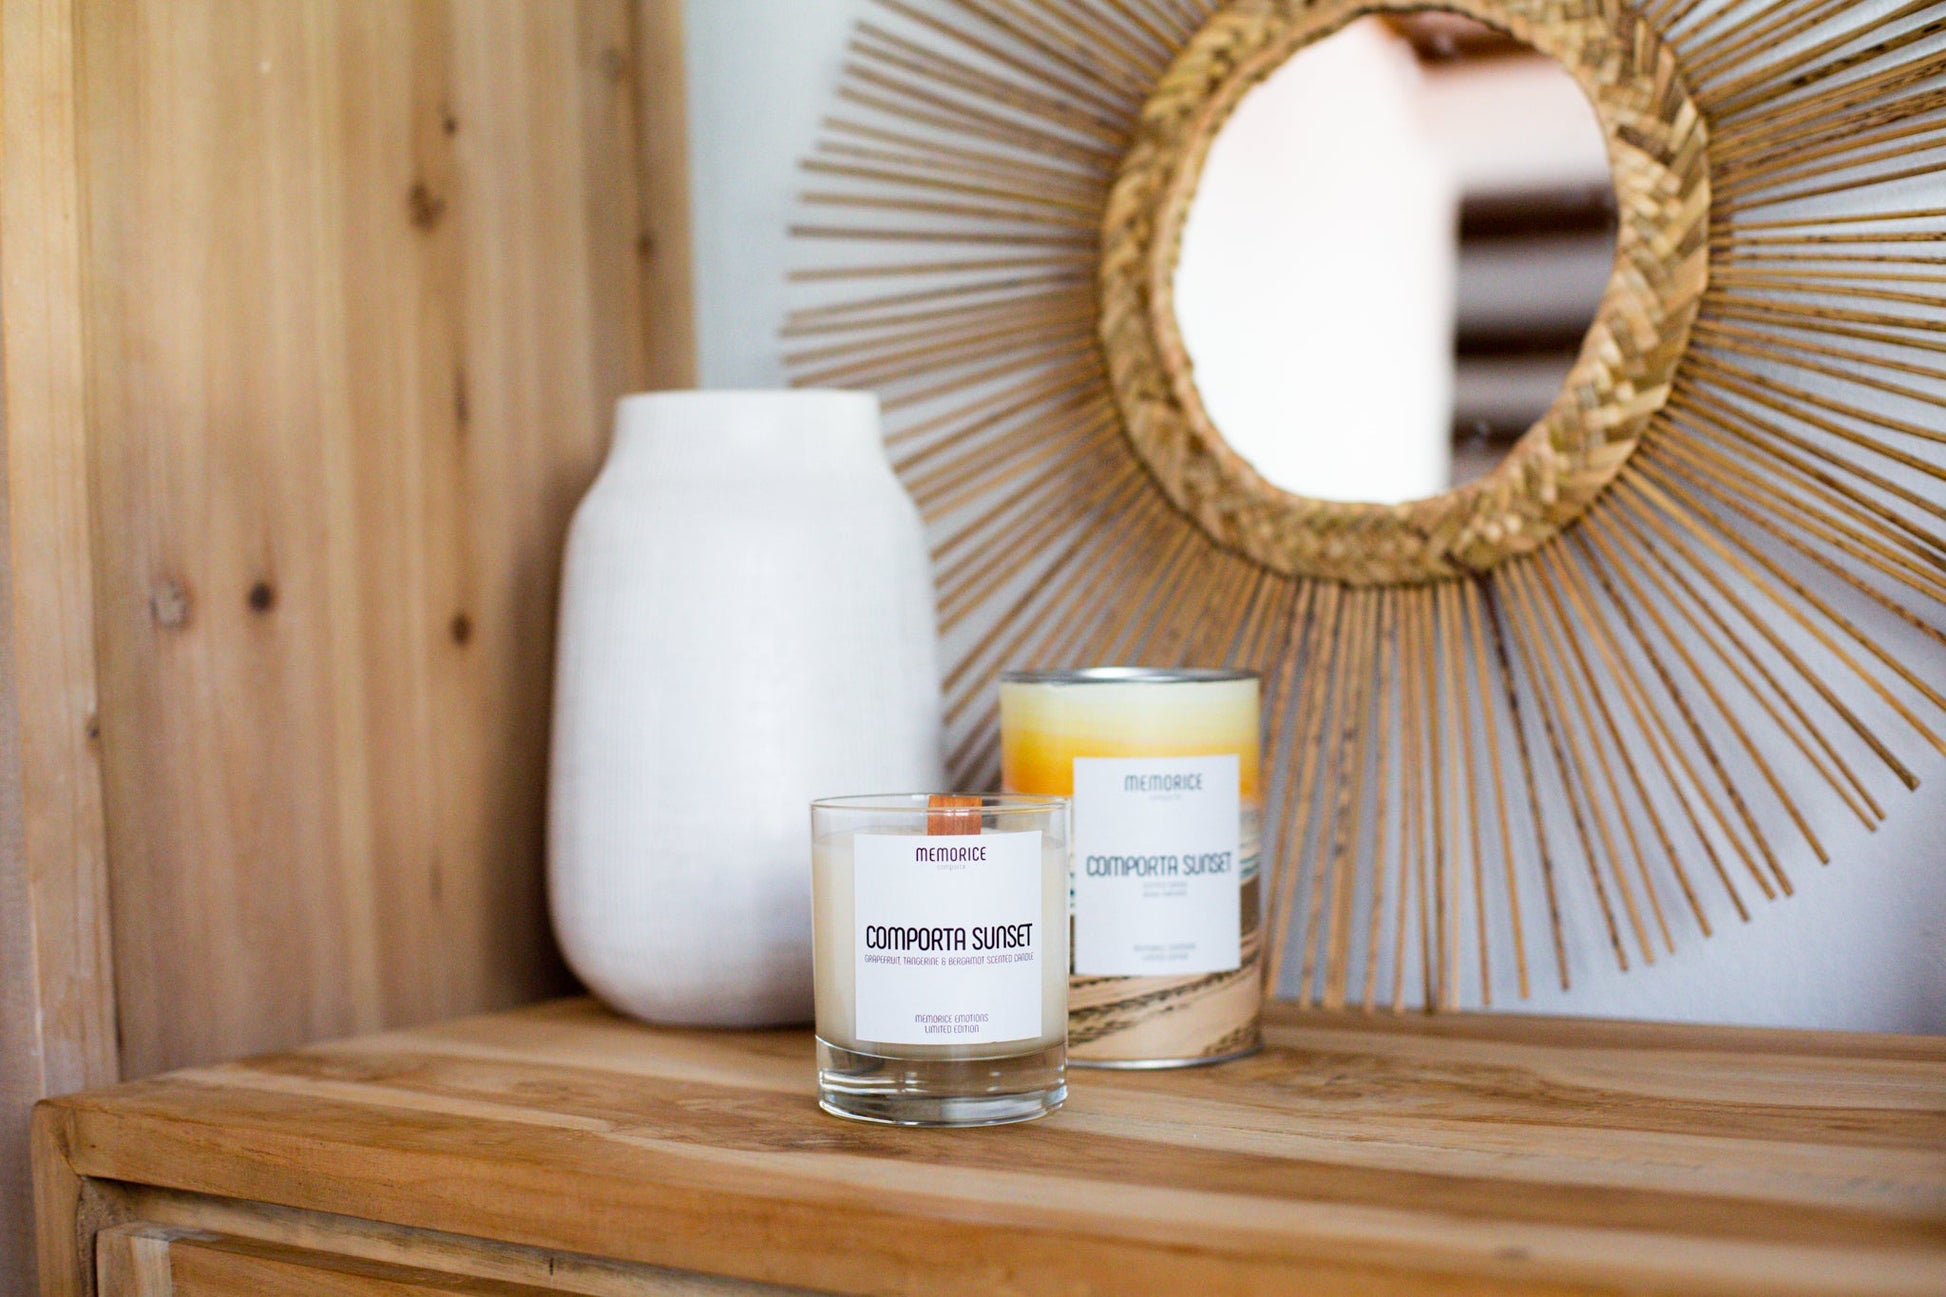 Comporta Sunset Scented Candle | CANDLE | Iberica - Pretty things from Portugal